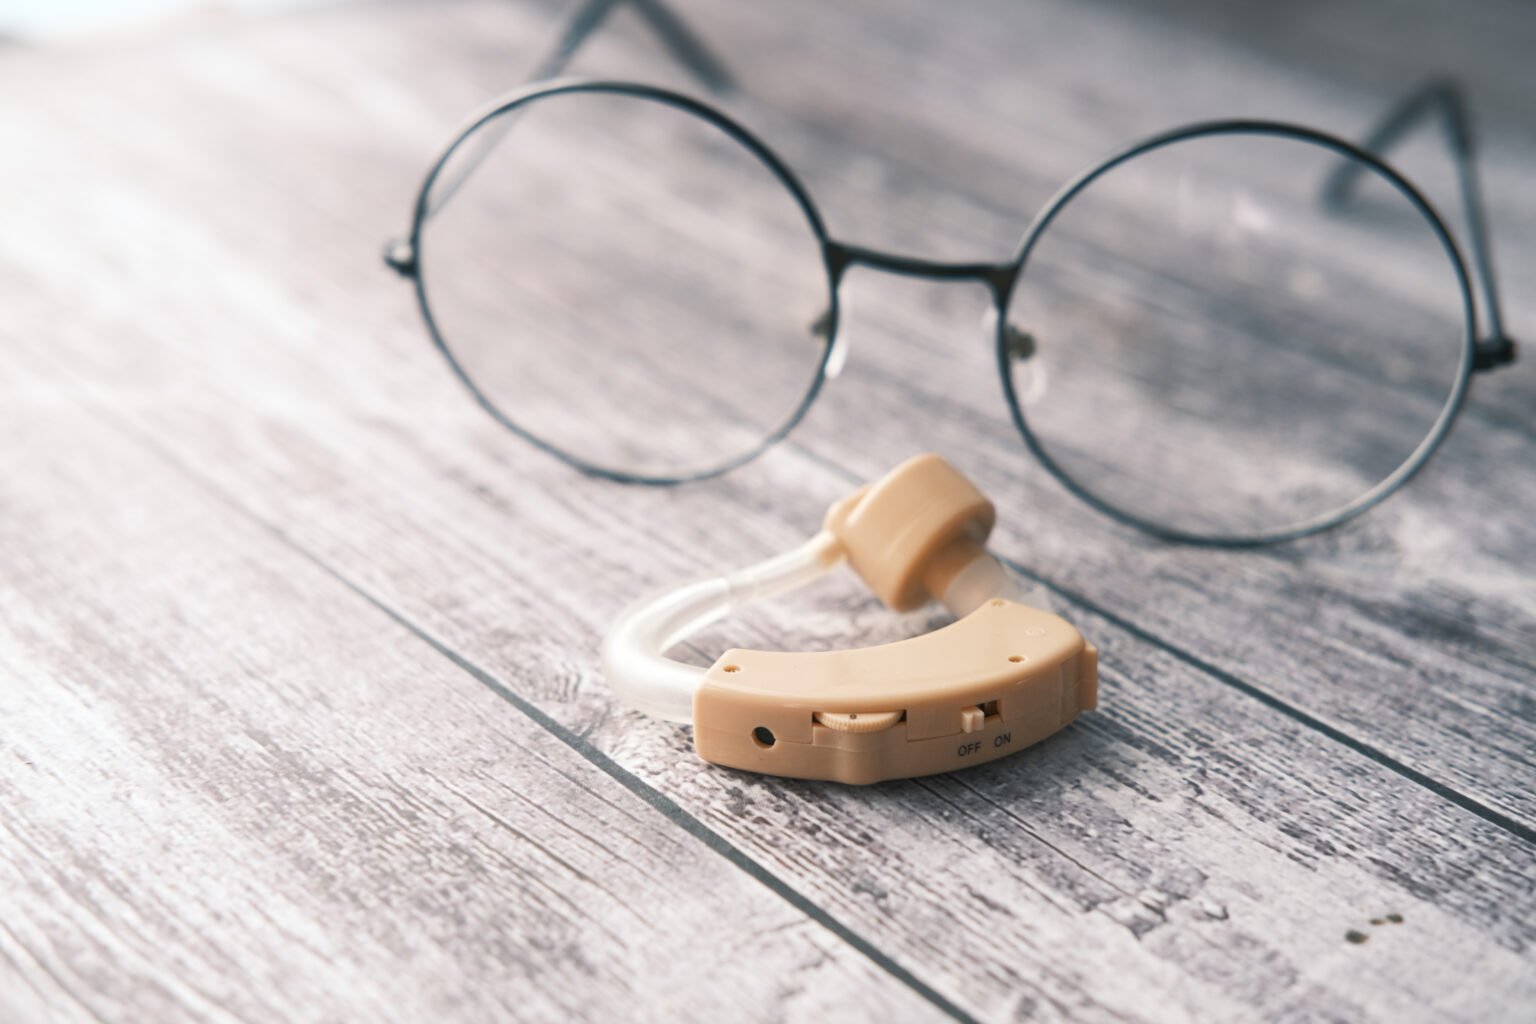 A hearing aid next to a pair of round-framed glasses on a wooden surface, symbolizing audiology equipment.